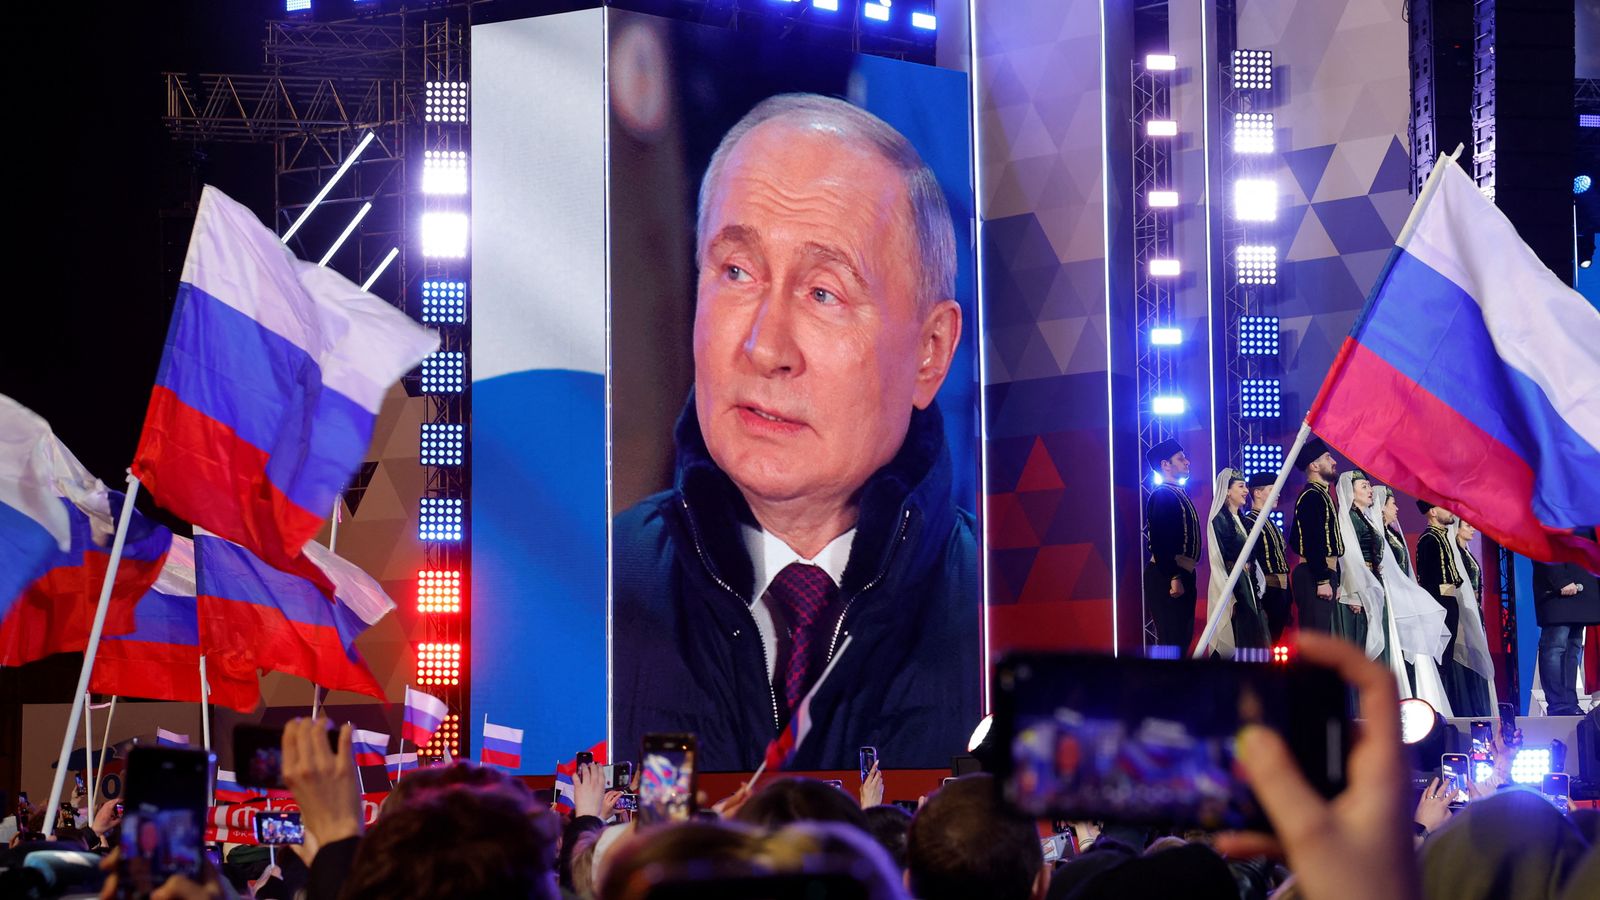 Vladimir Putin addresses Red Square crowds after landslide win as West condemns ‘undemocratic’ election